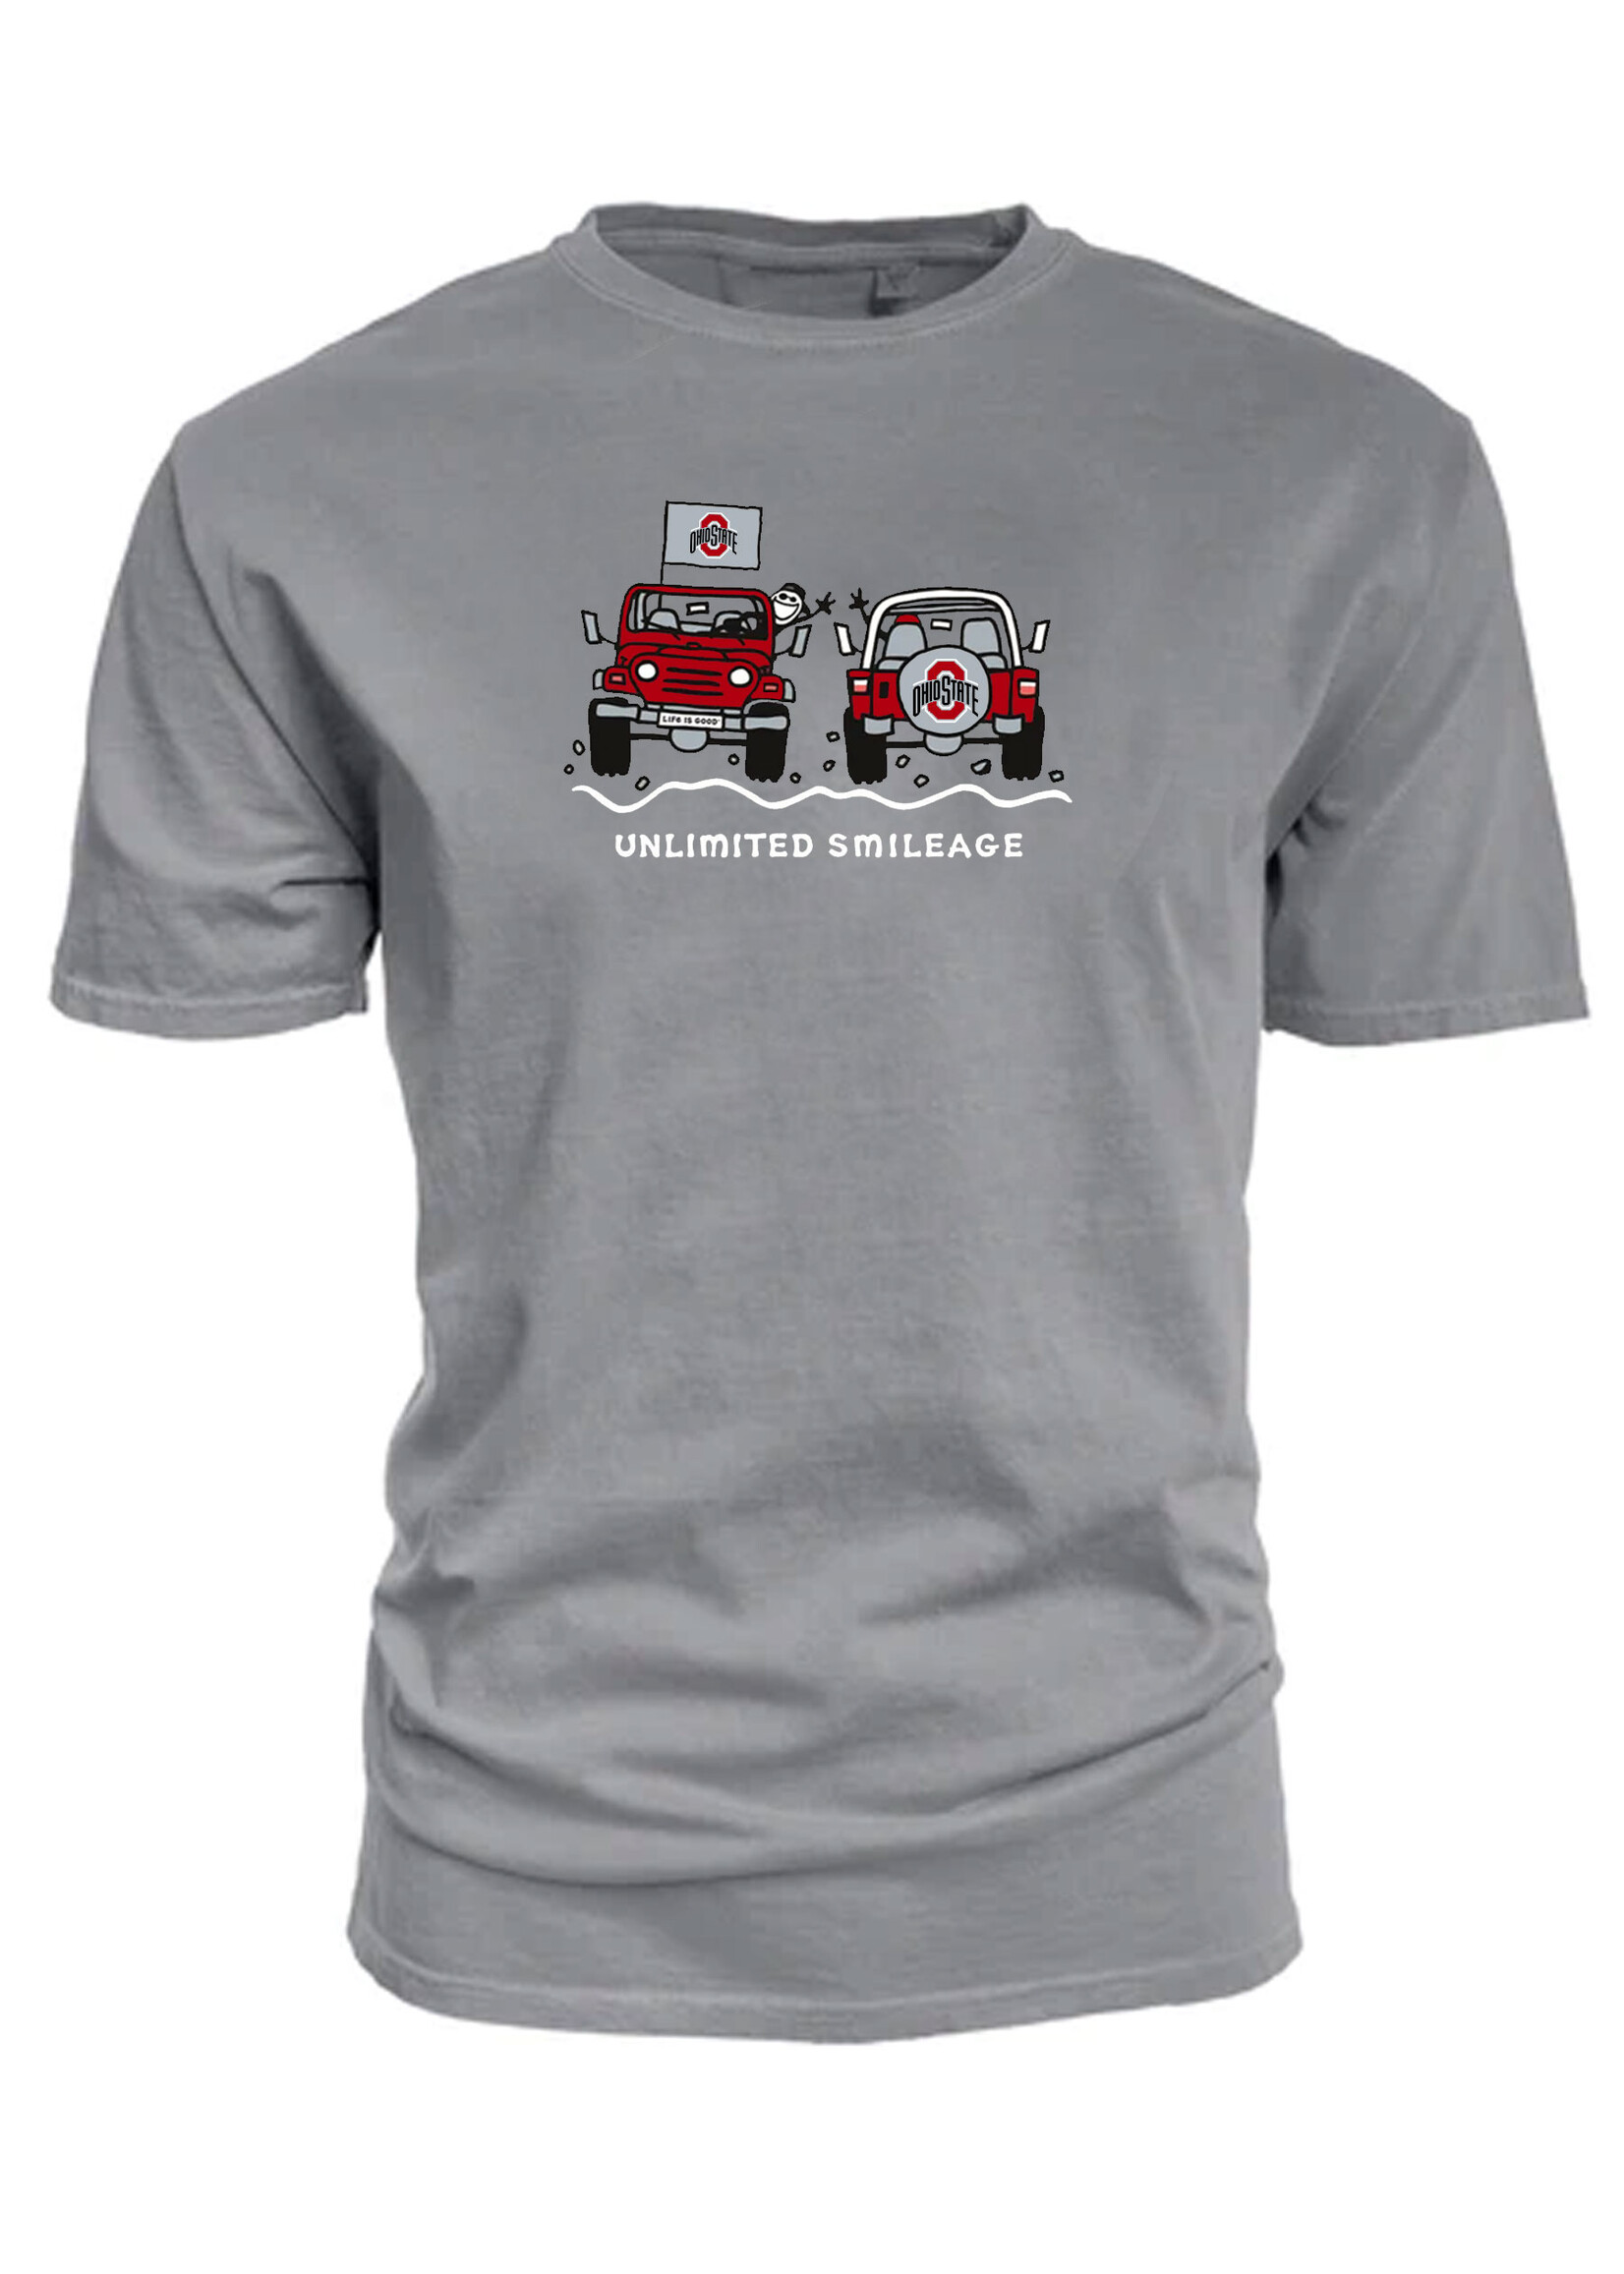 Blue 84 Ohio State Buckeyes Life is Good Unlimited Smileage T-Shirt